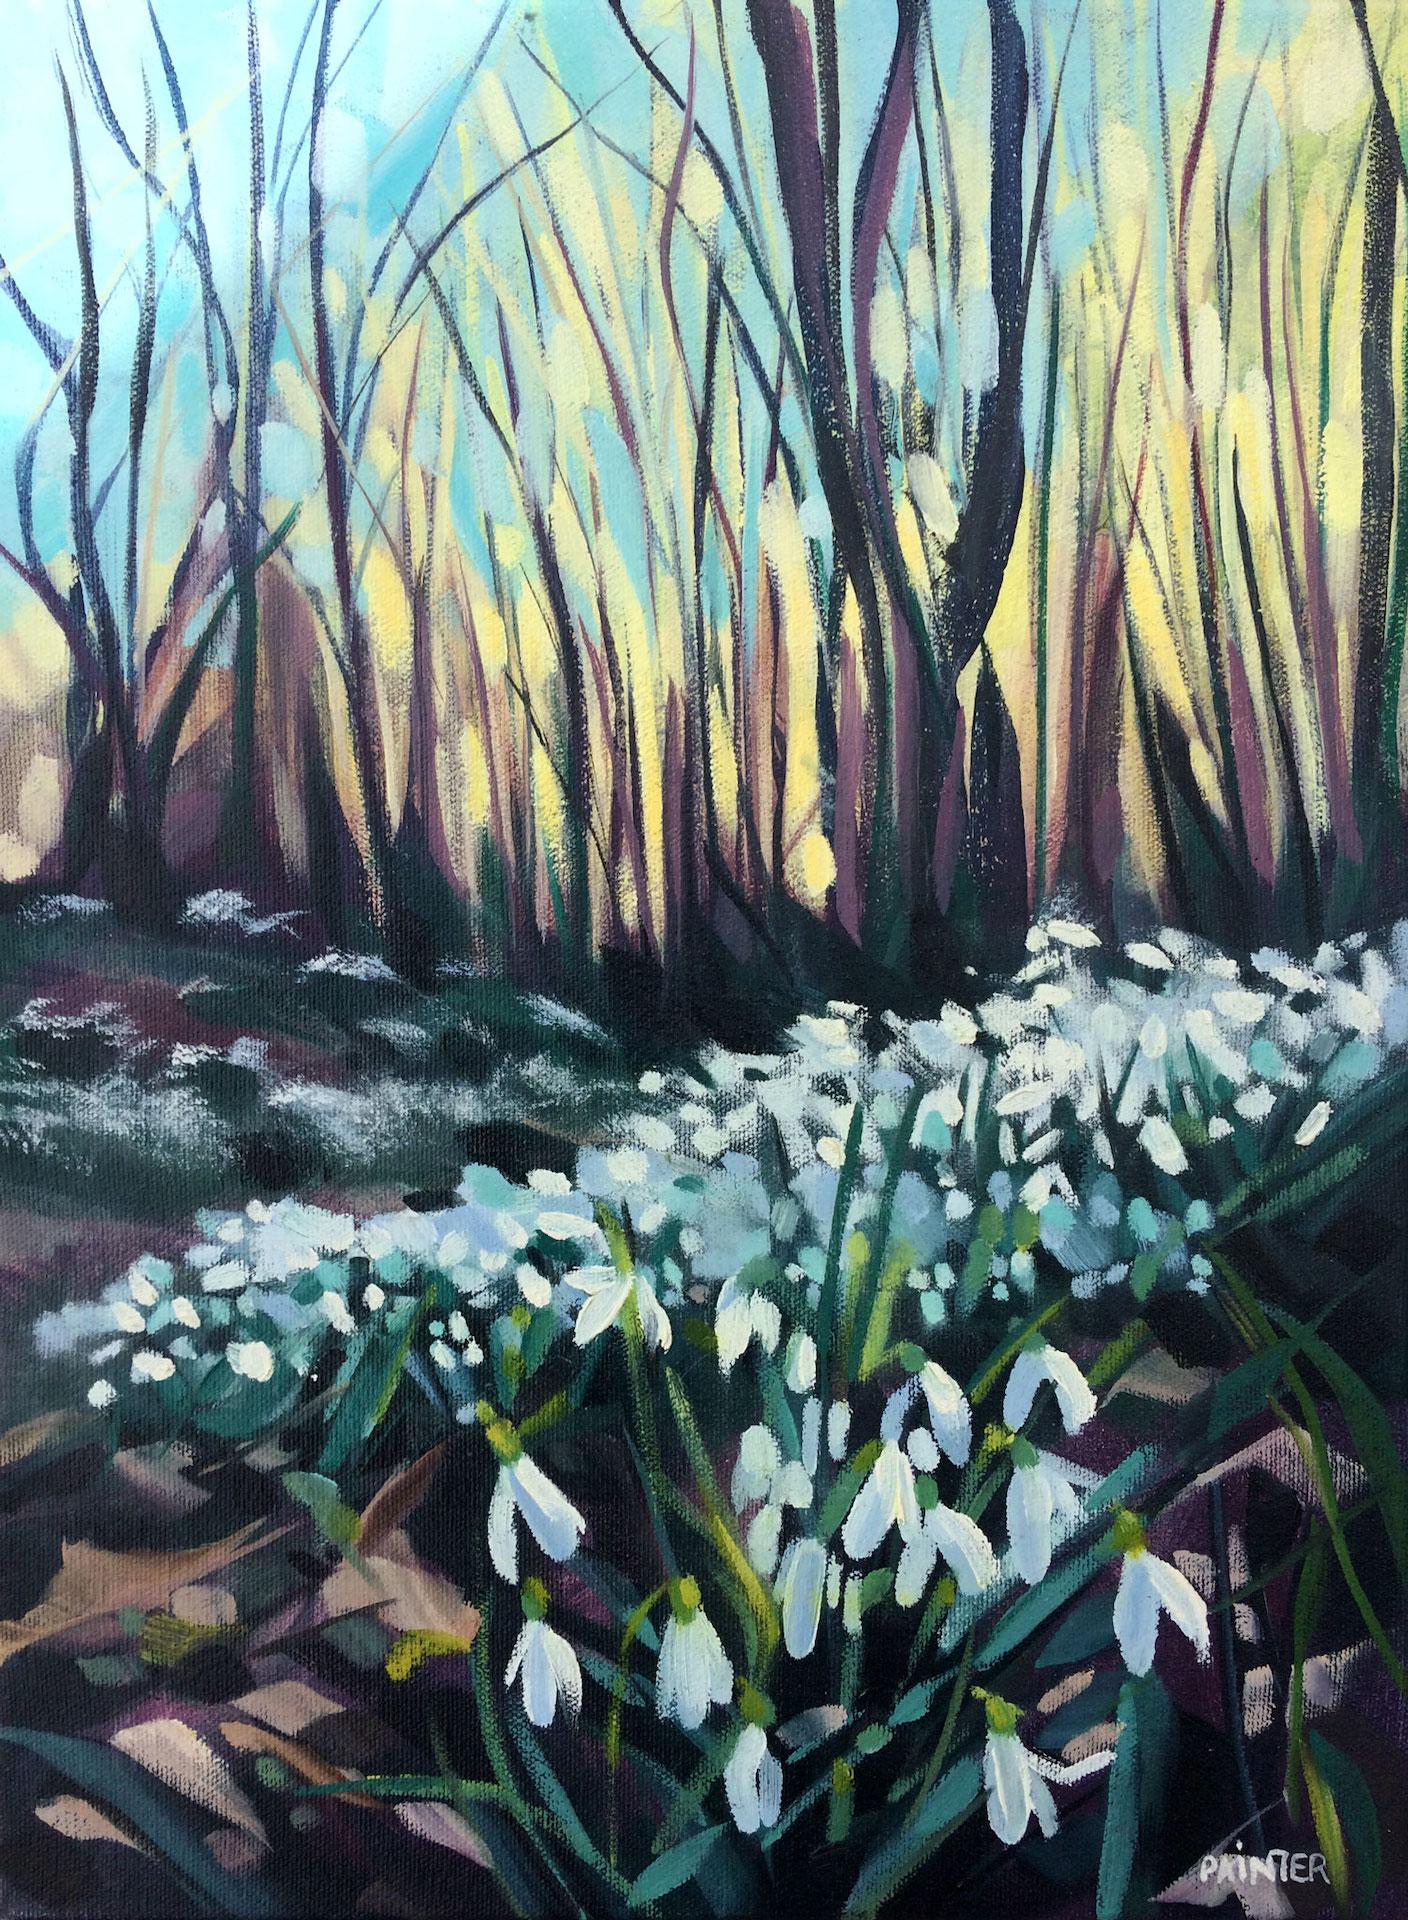 oil on canvas snow drops on the painting still life with flowers texture oil painting still life for dinner room. Original oil painting